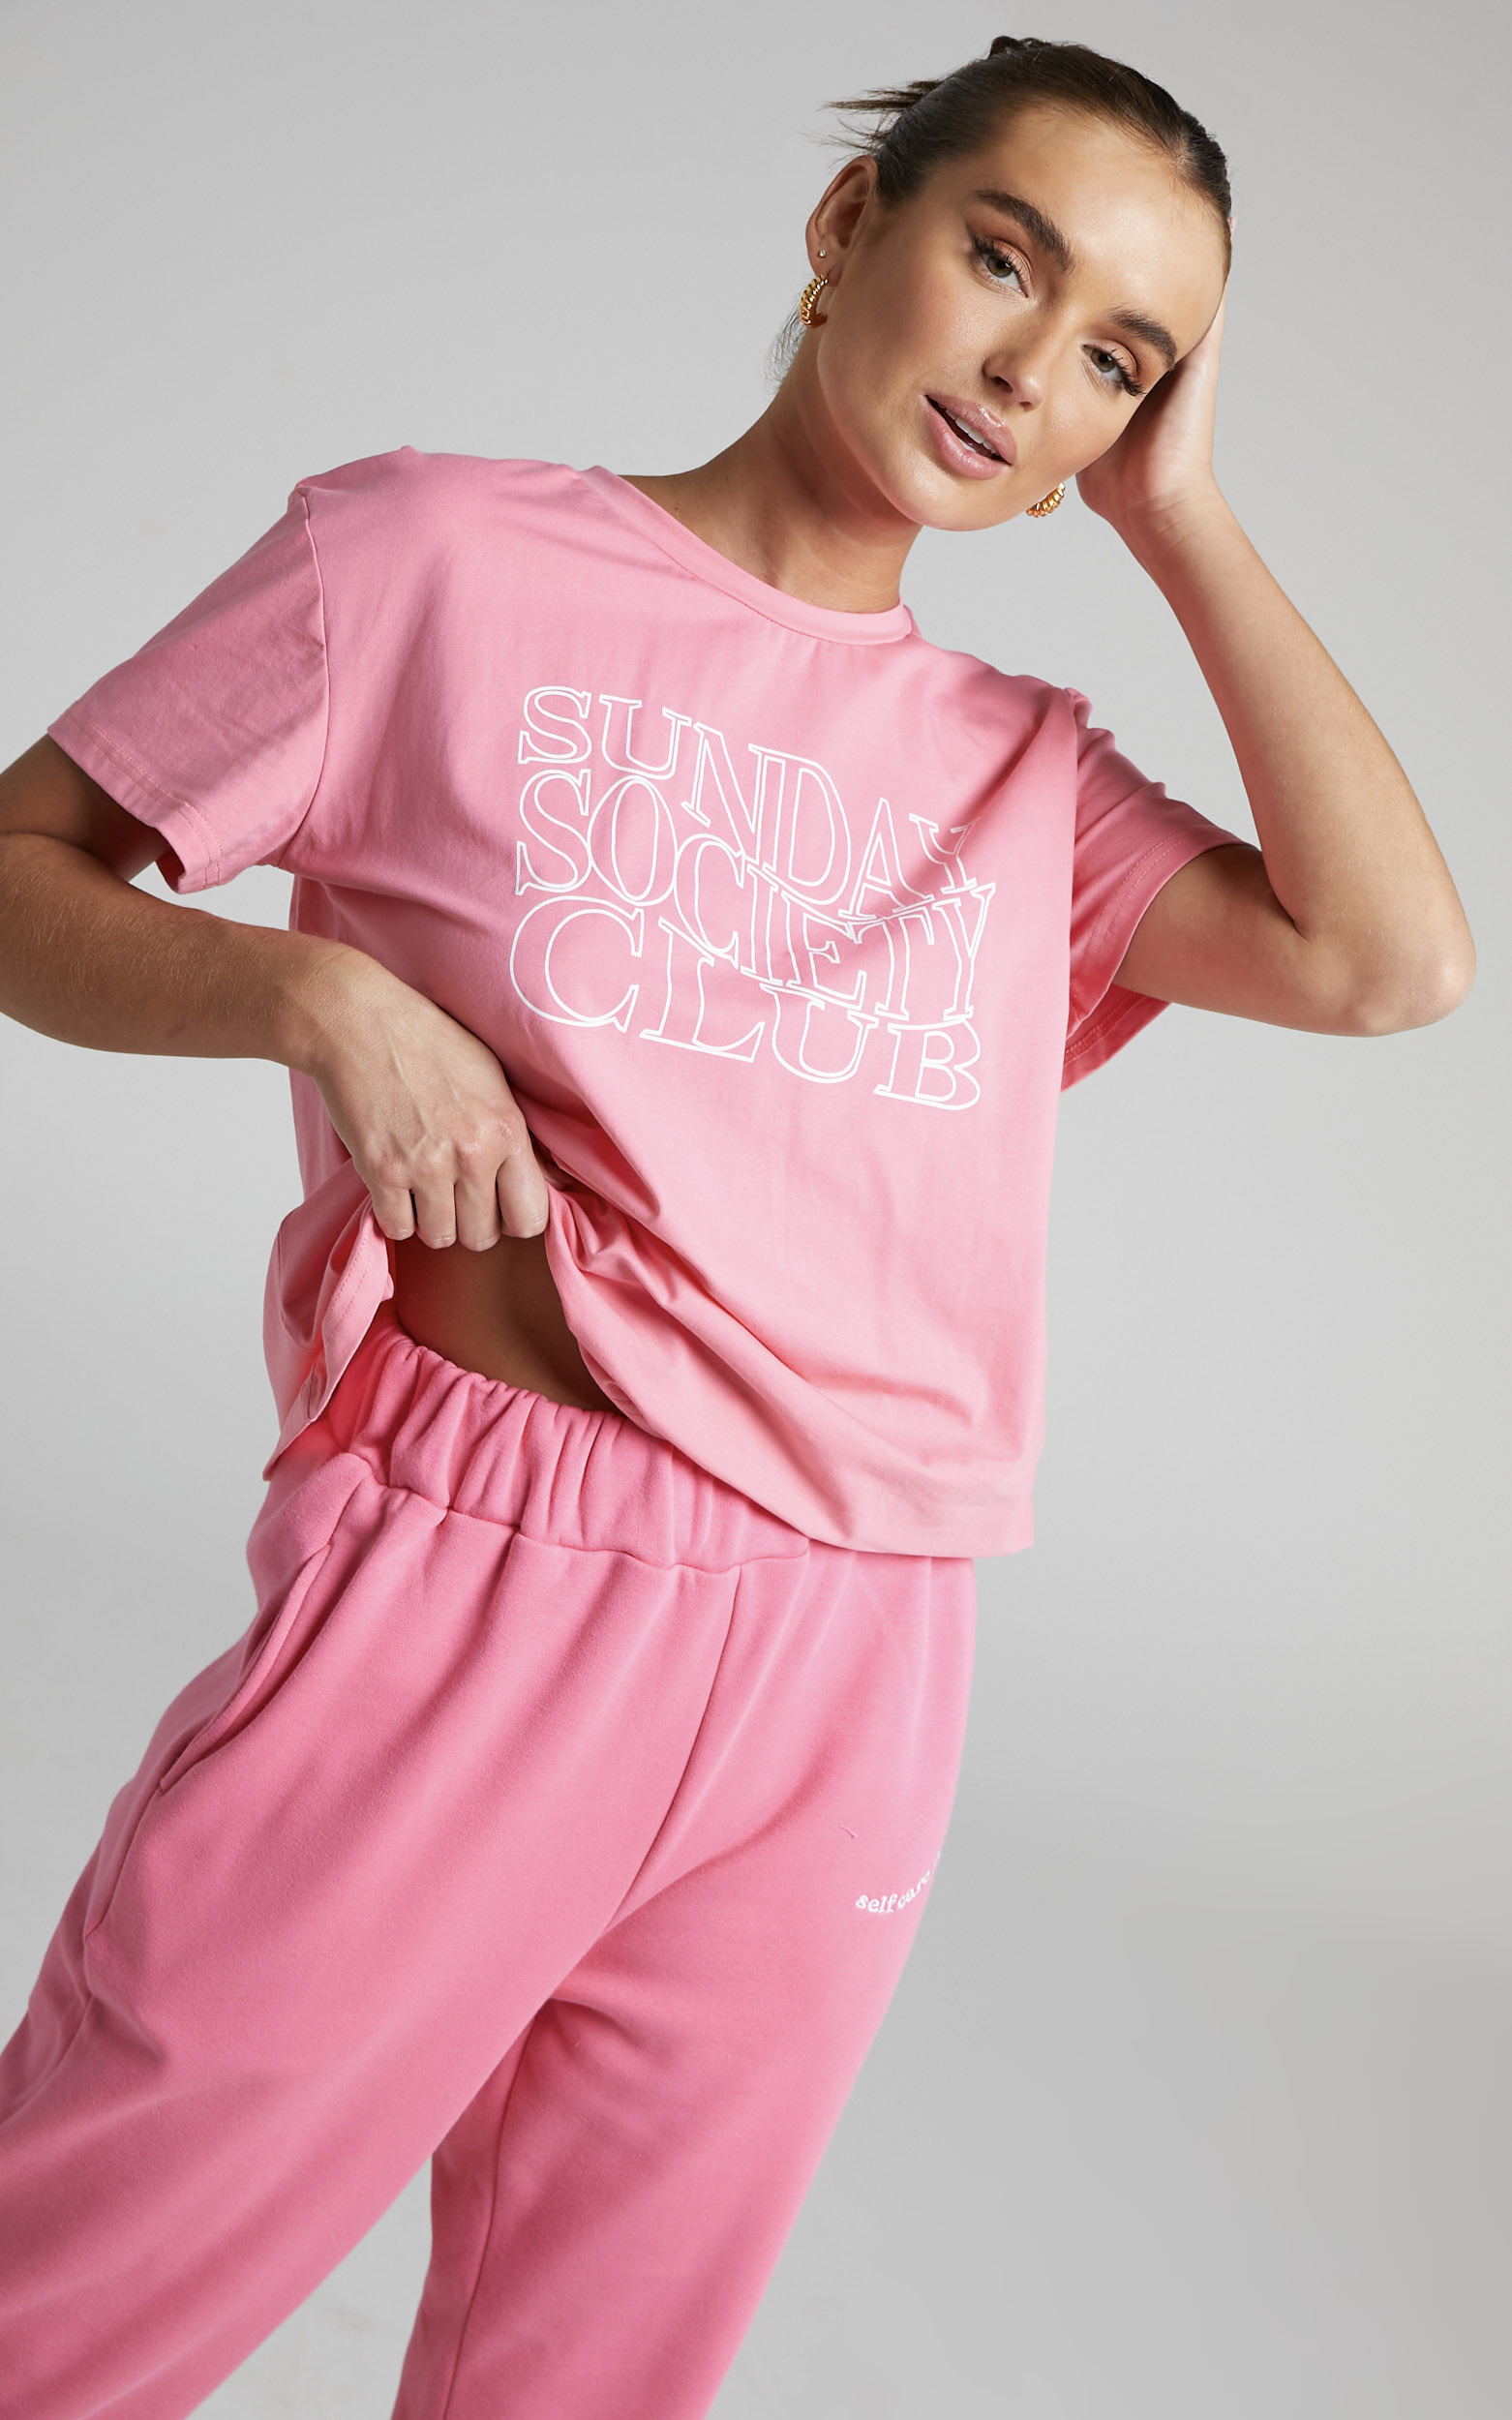 Sunday Society Club - Logo T-Shirt in Pink - 04, PNK1, hi-res image number null